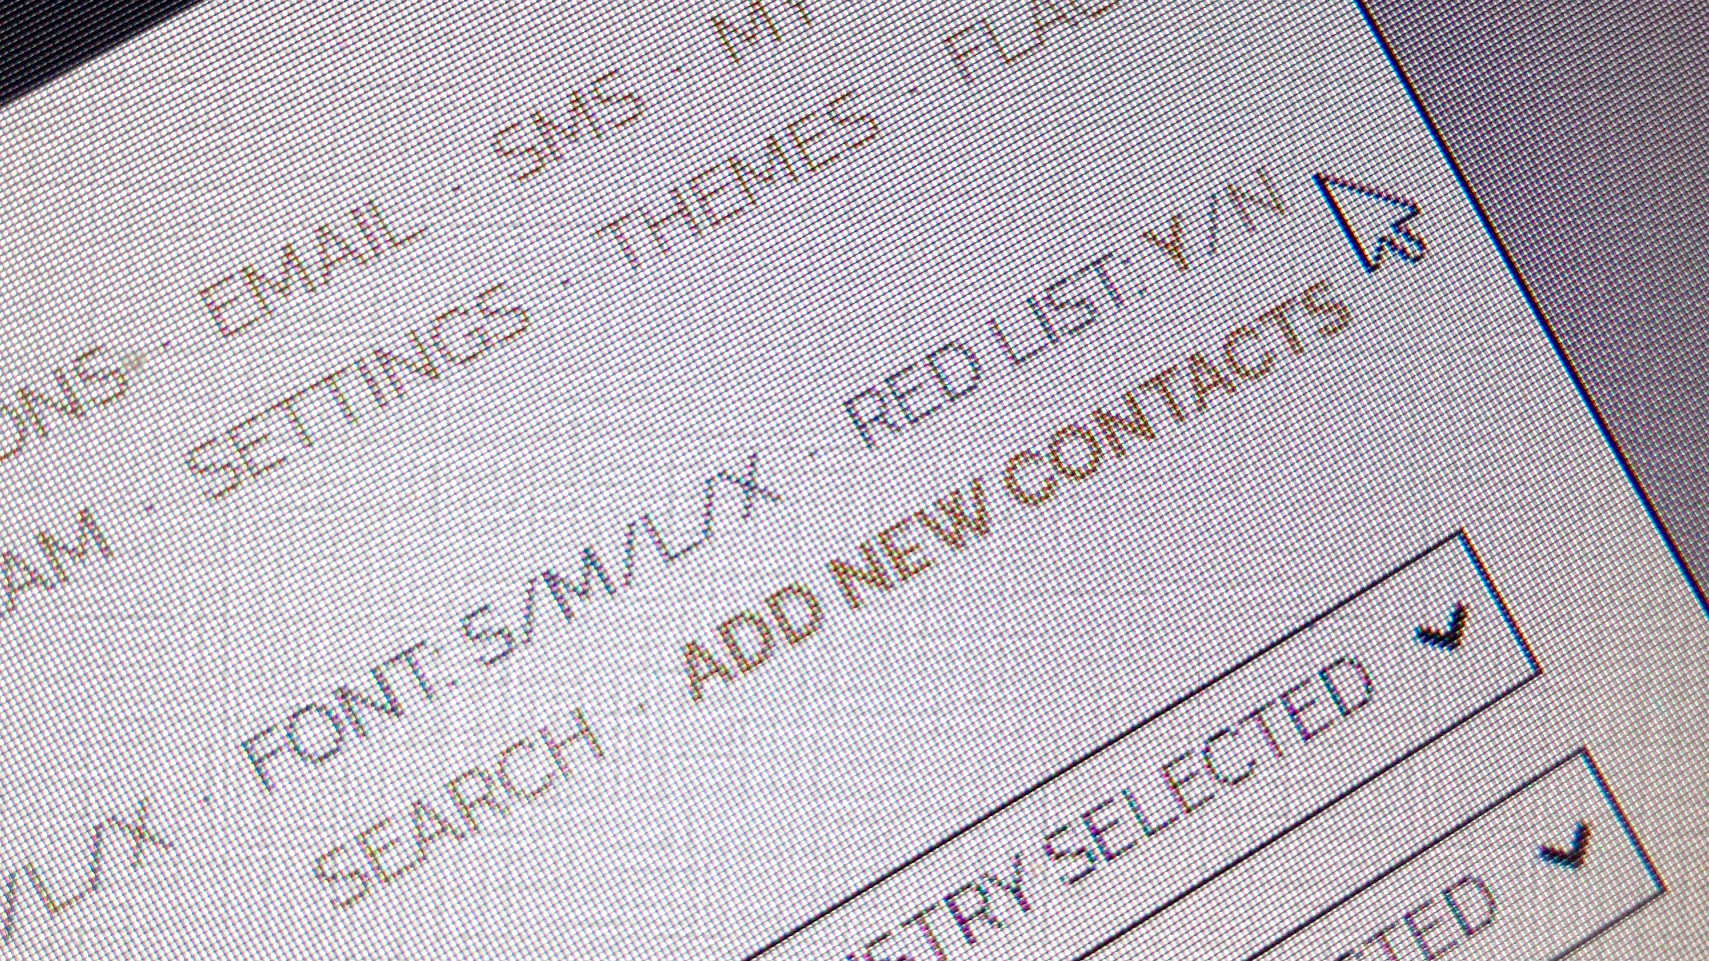 With YourPCM, getting your weekday red list email is as simple as flicking a switch!